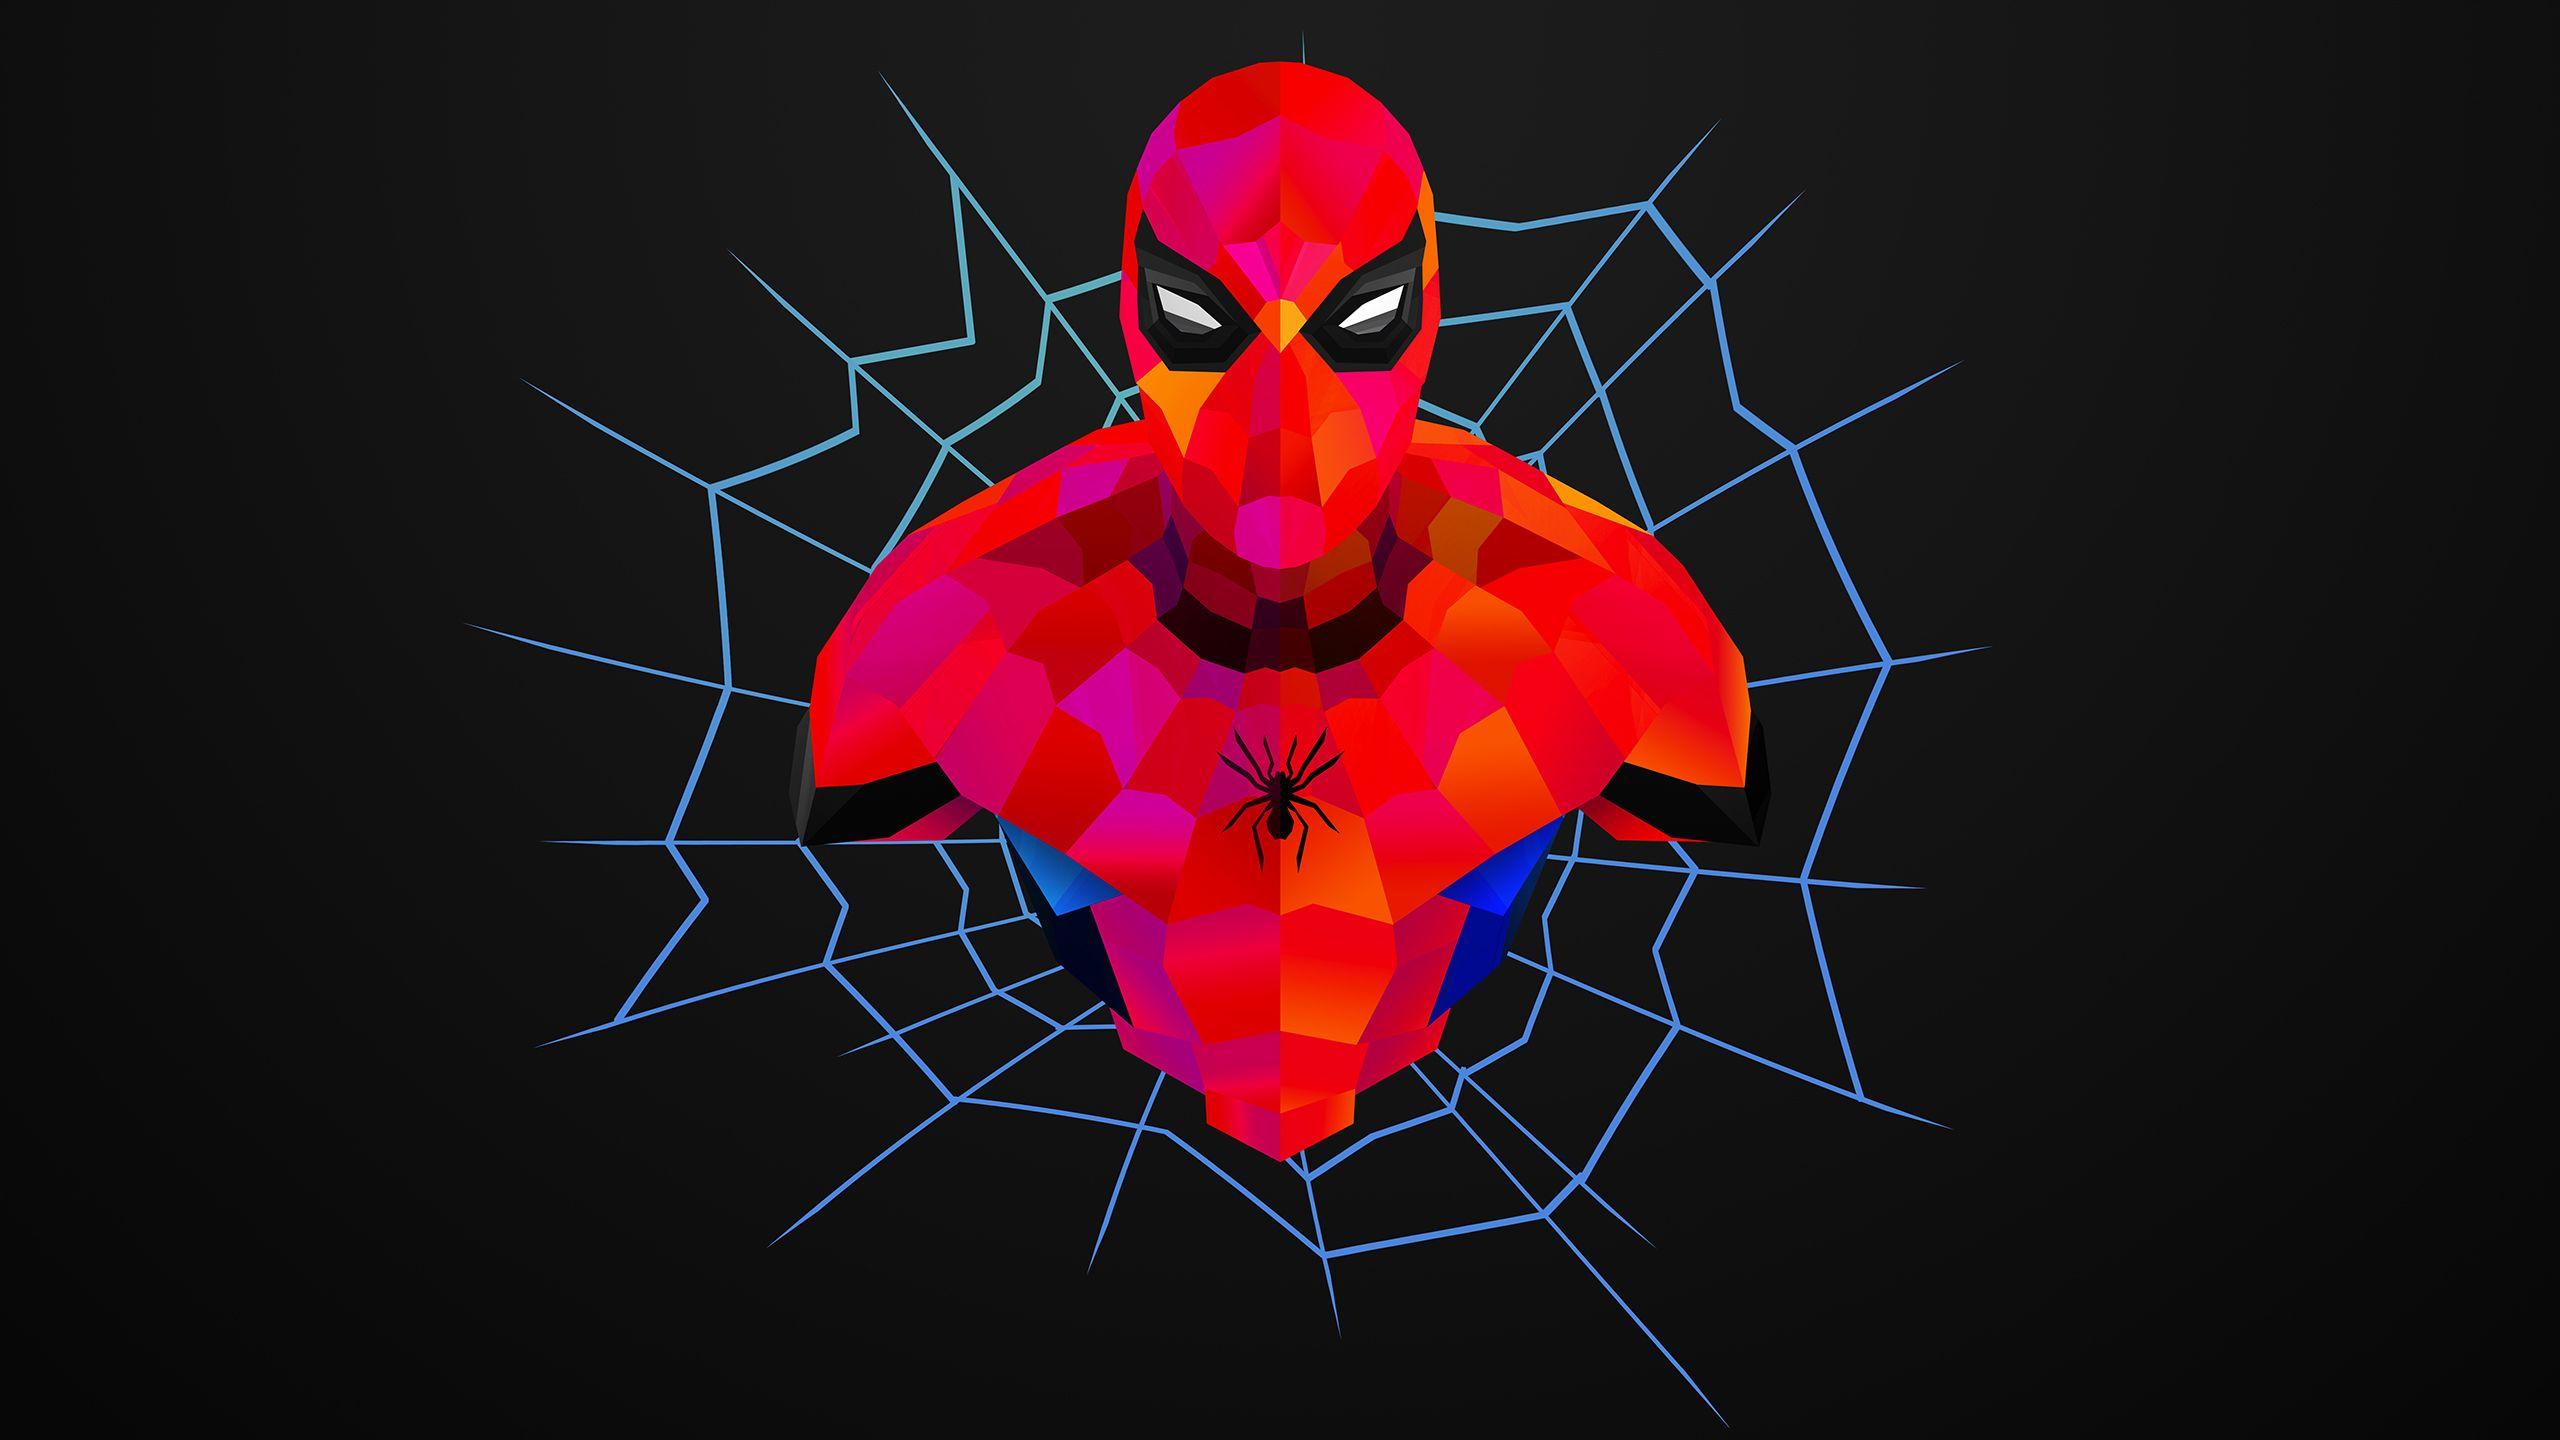 Spider Man Aesthetic Wallpaper Free Spider Man Aesthetic Background